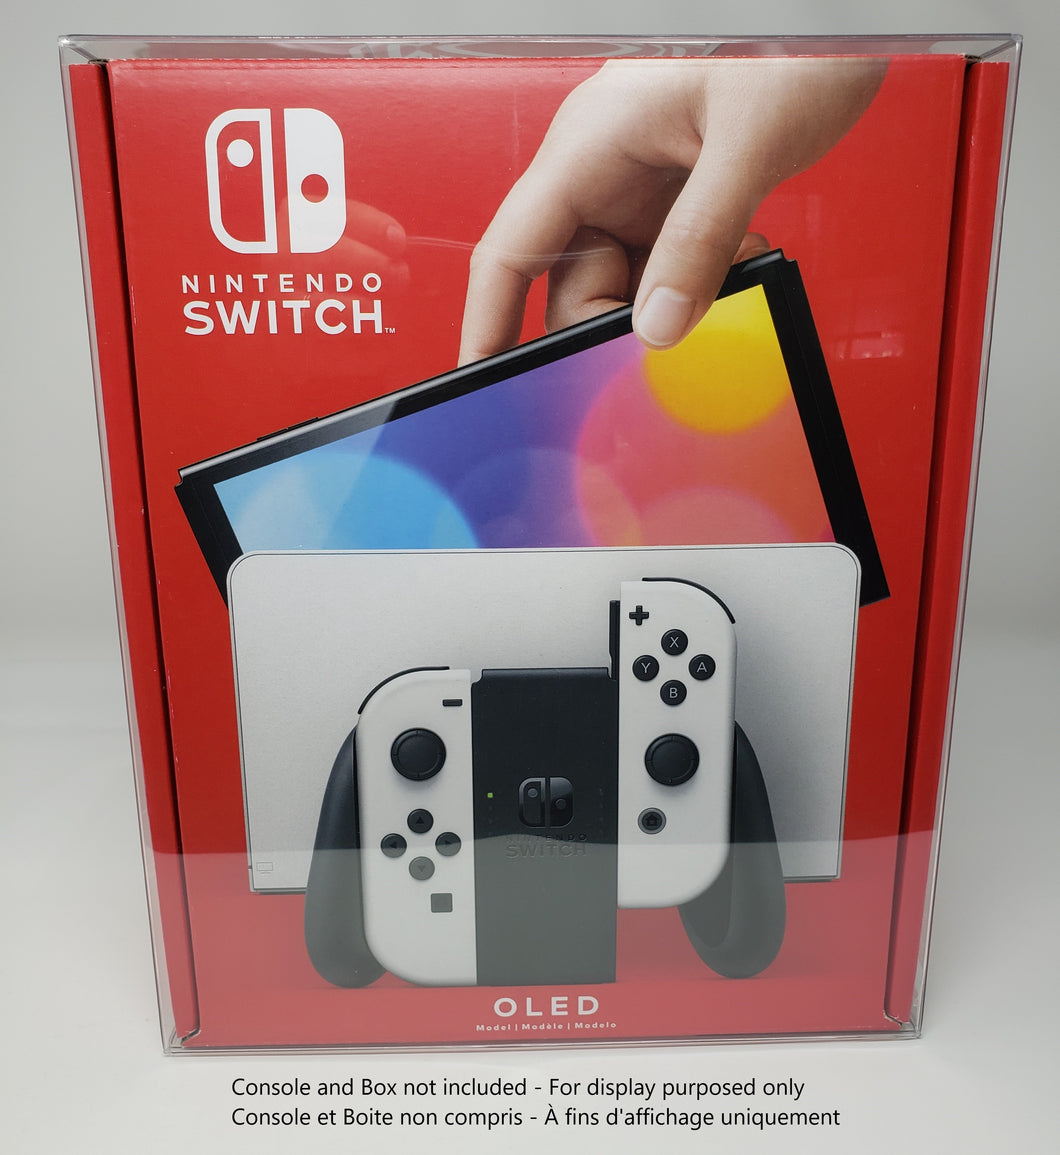 BOX PROTECTOR FOR SWITCH OLED SYSTEM CLEAR PLASTIC CASE